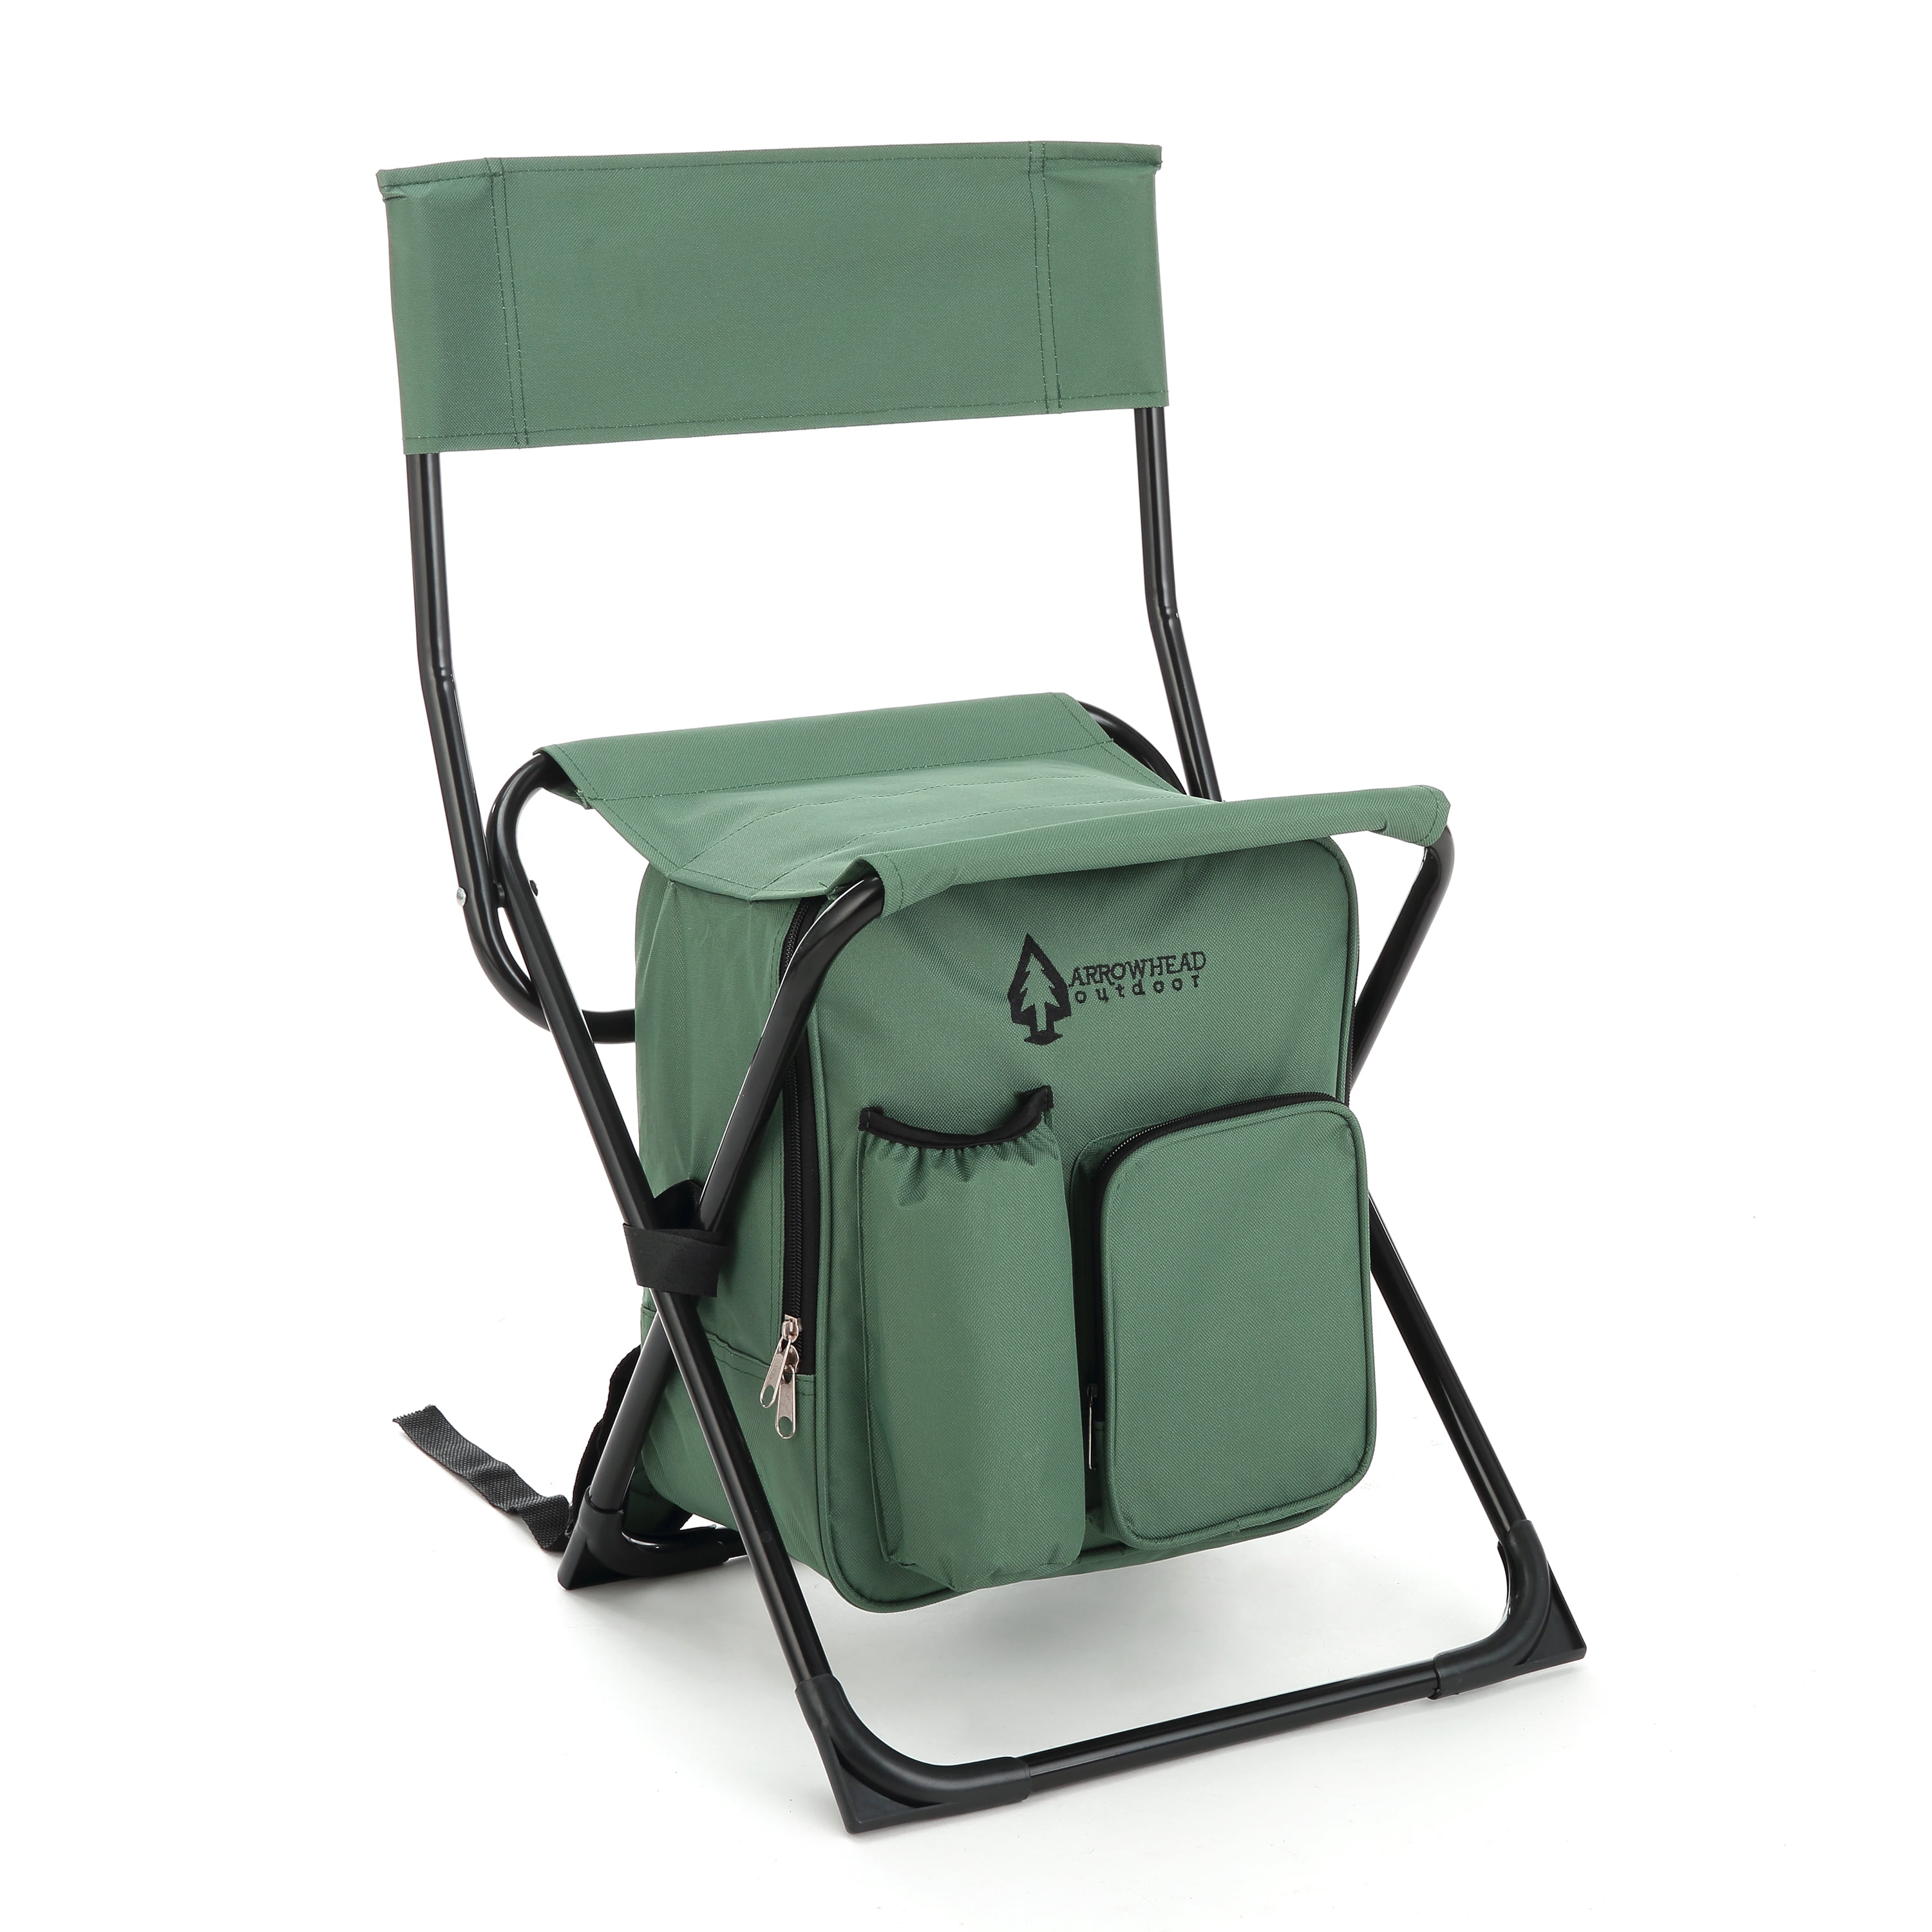 ARROWHEAD OUTDOOR Multi-Function 3-in-1 Compact Camp Chair: Backpack, Stool  & Insulated Cooler, w/ Bottle Holder & Storage Bag, External Pockets